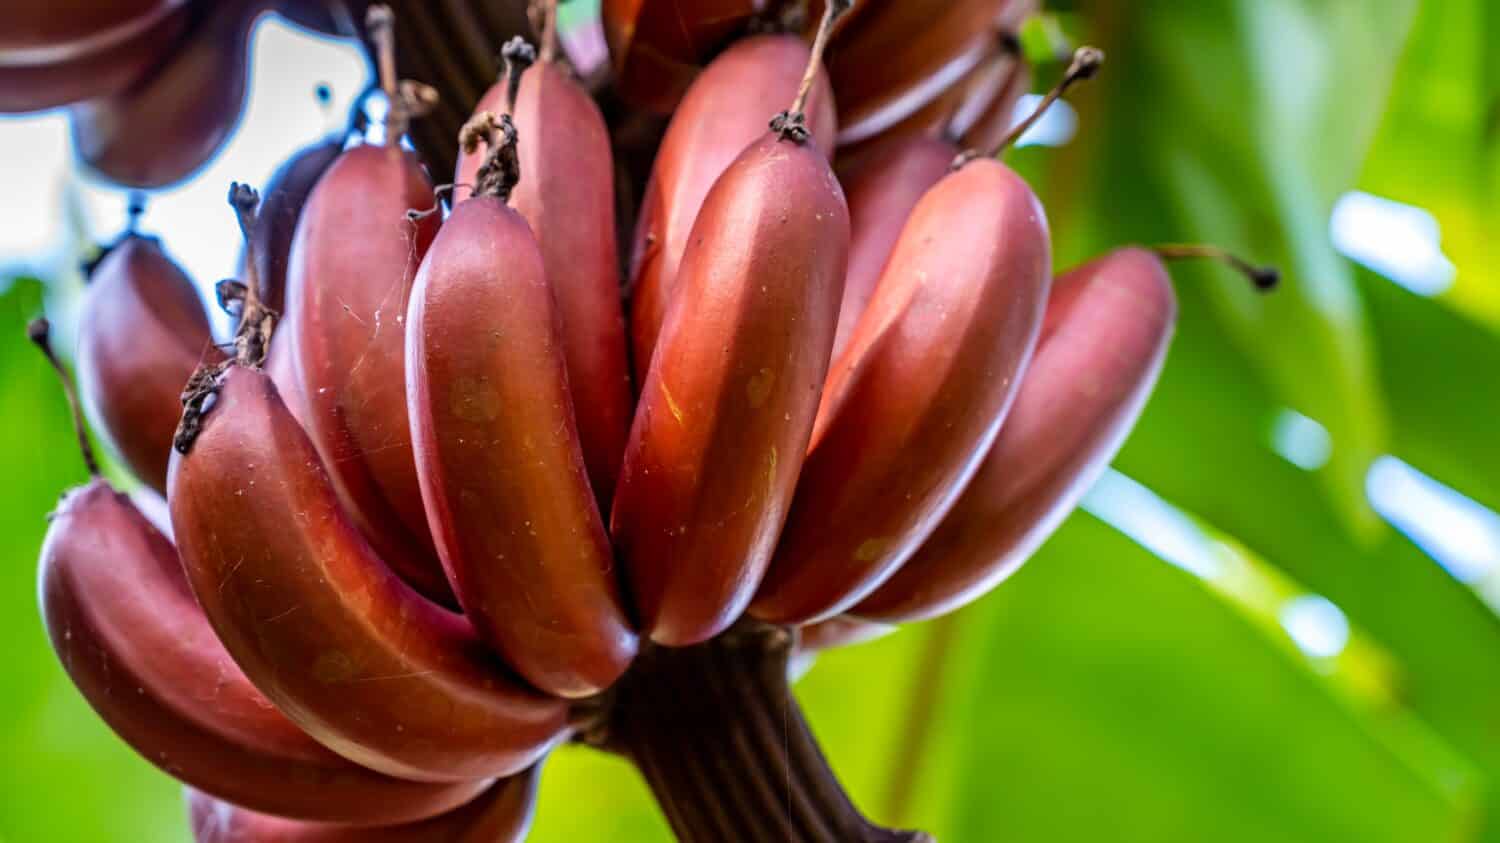 Red bananas are a group of varieties of banana with reddish-purple skin. Some are smaller and plumper than the common Cavendish banana, others much larger.